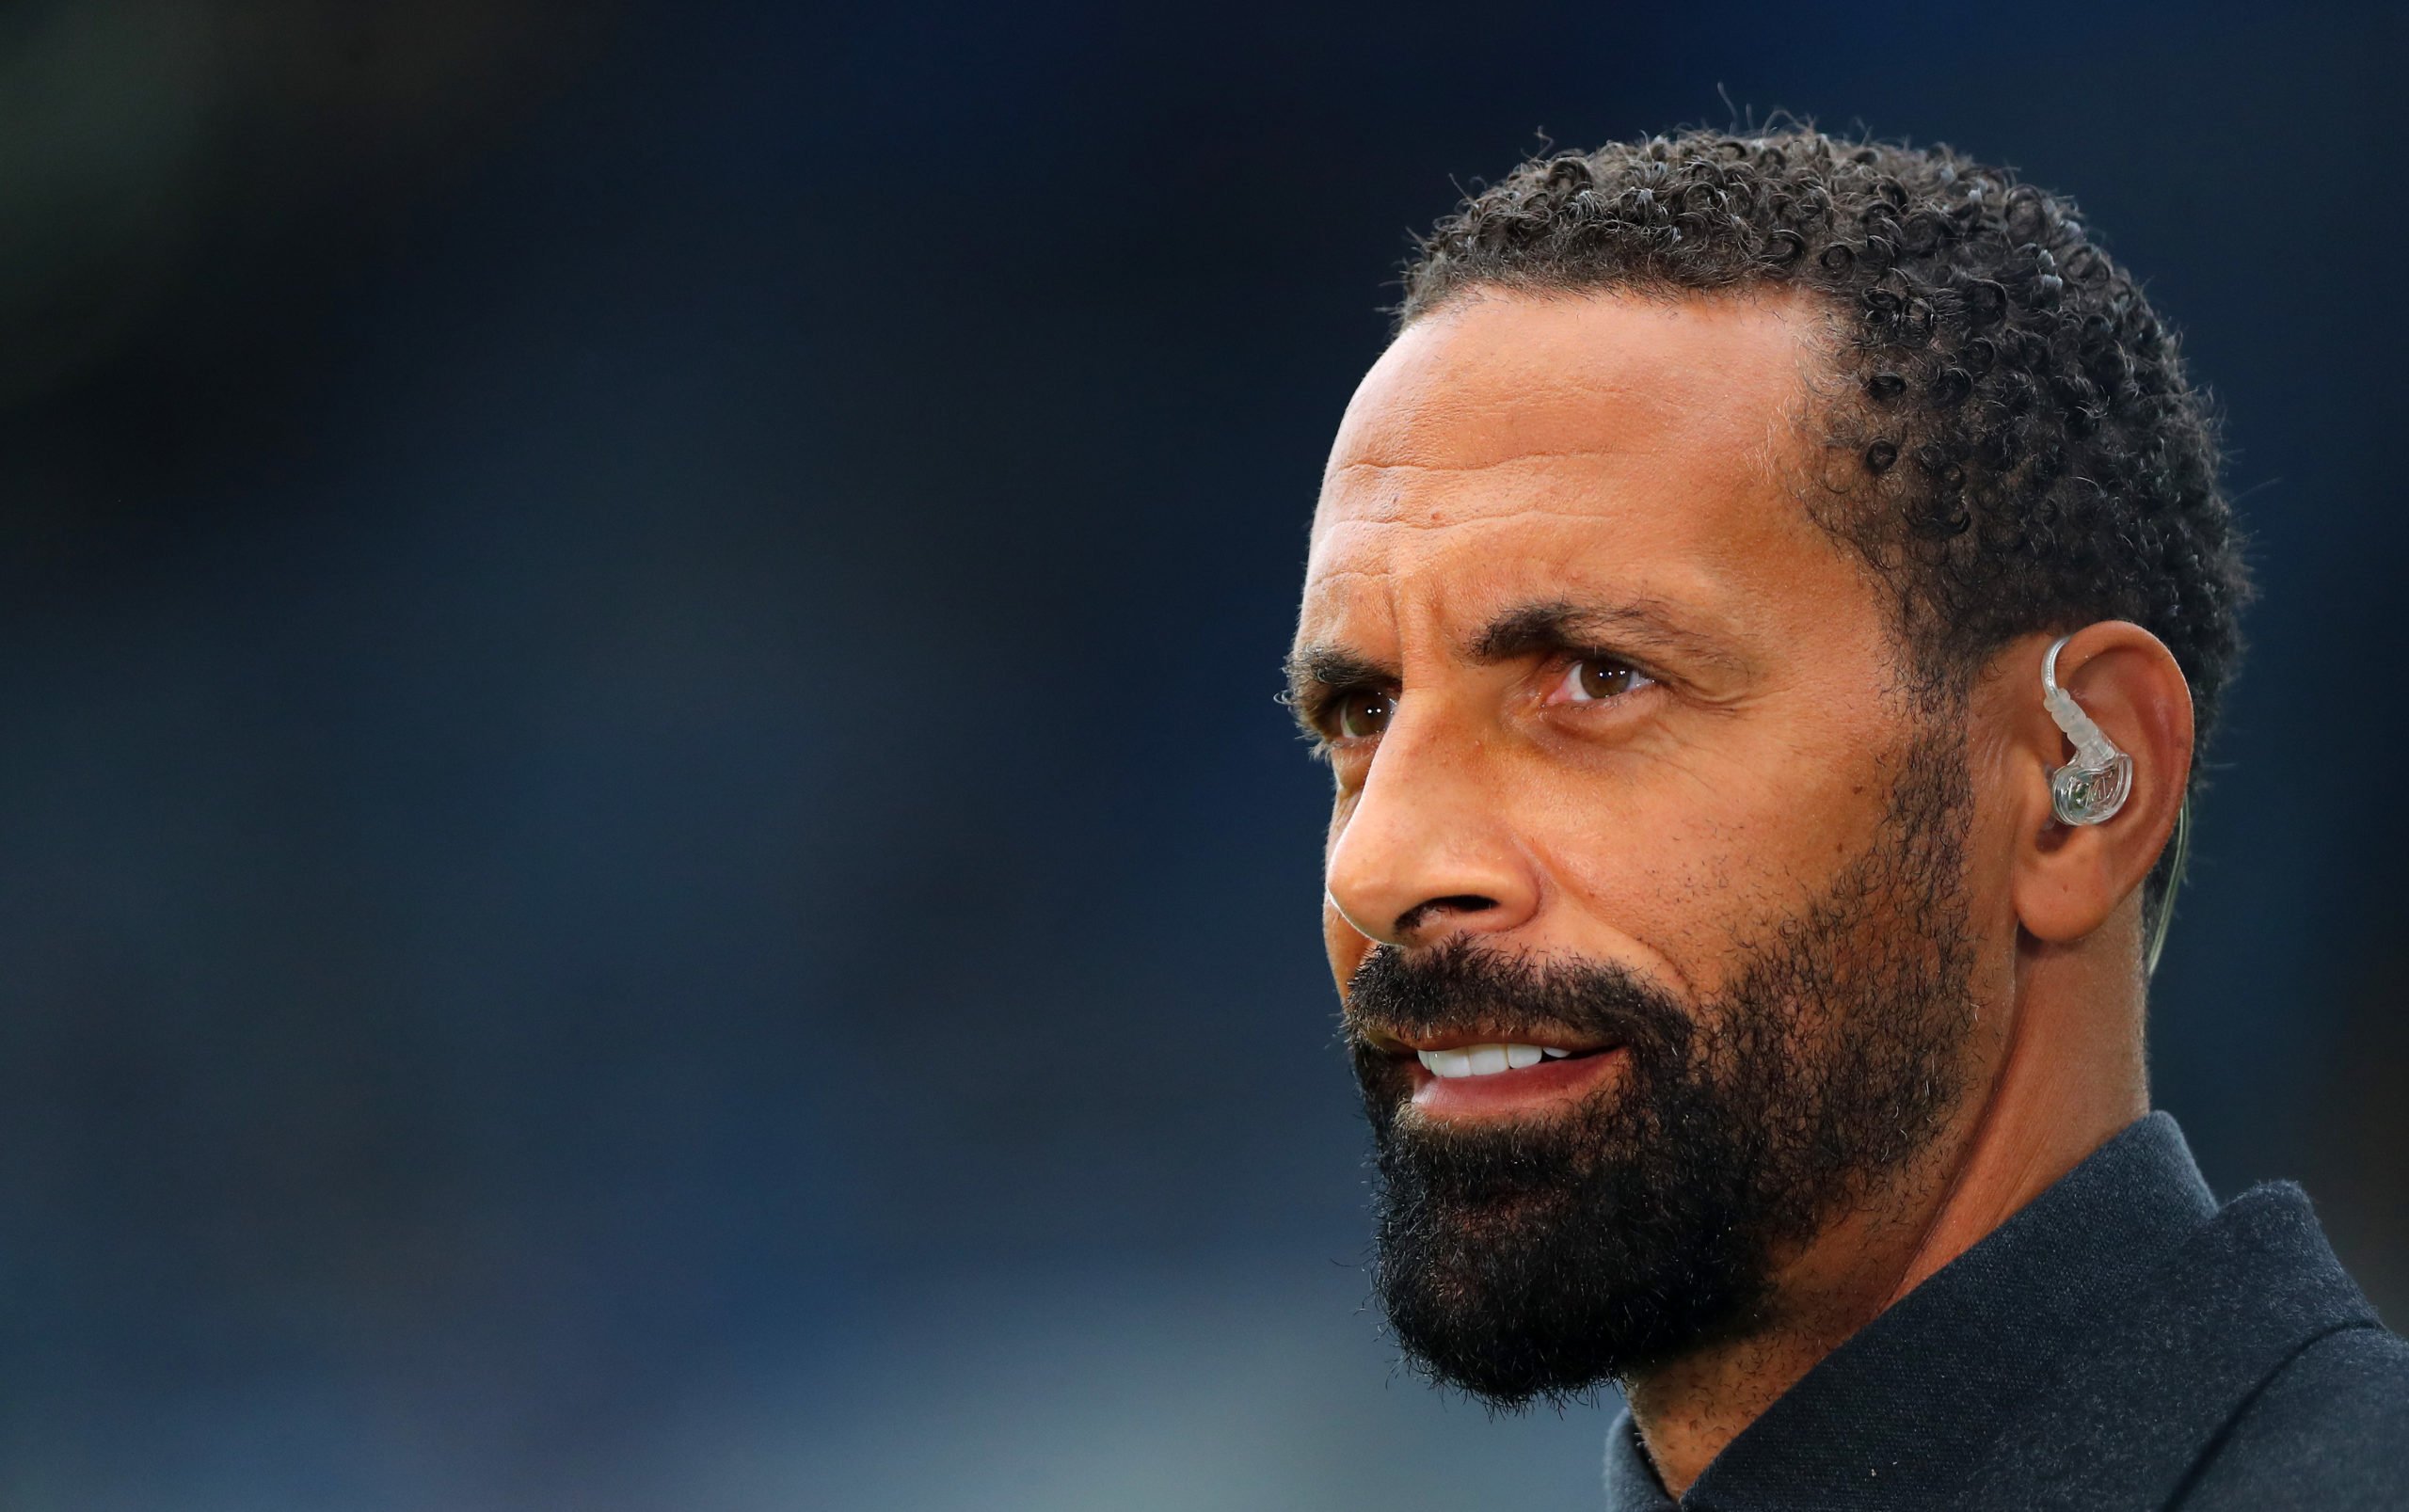 ‘Beautiful’: Rio Ferdinand reckons £105k-a-week Chelsea player is absolutely perfect for Tuchel's system